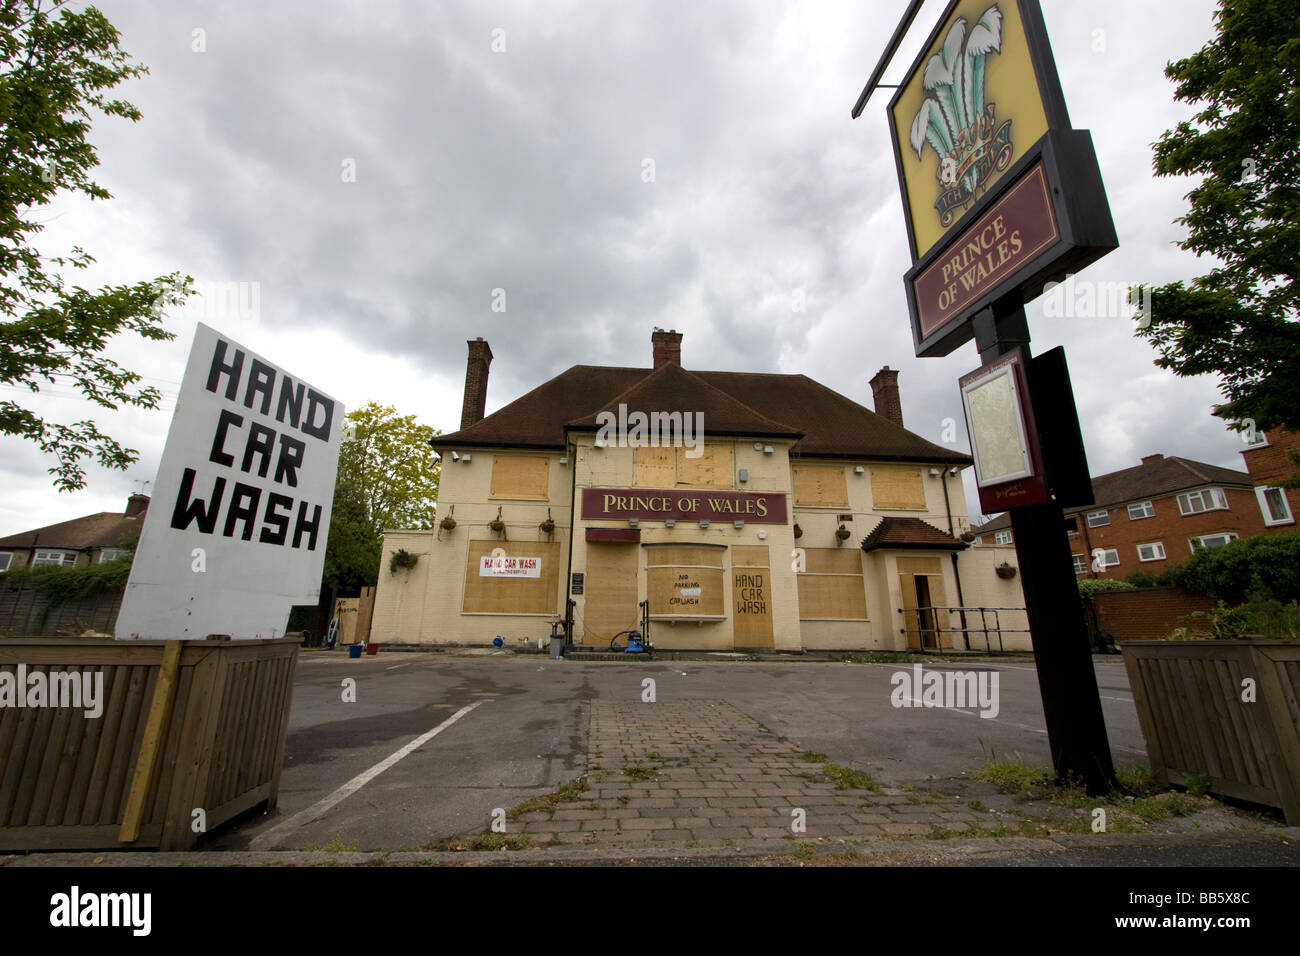 closed pub shut Prince of Wales public house with shuttered window and hand car wash signs in forecourt Chingford London Stock Photo